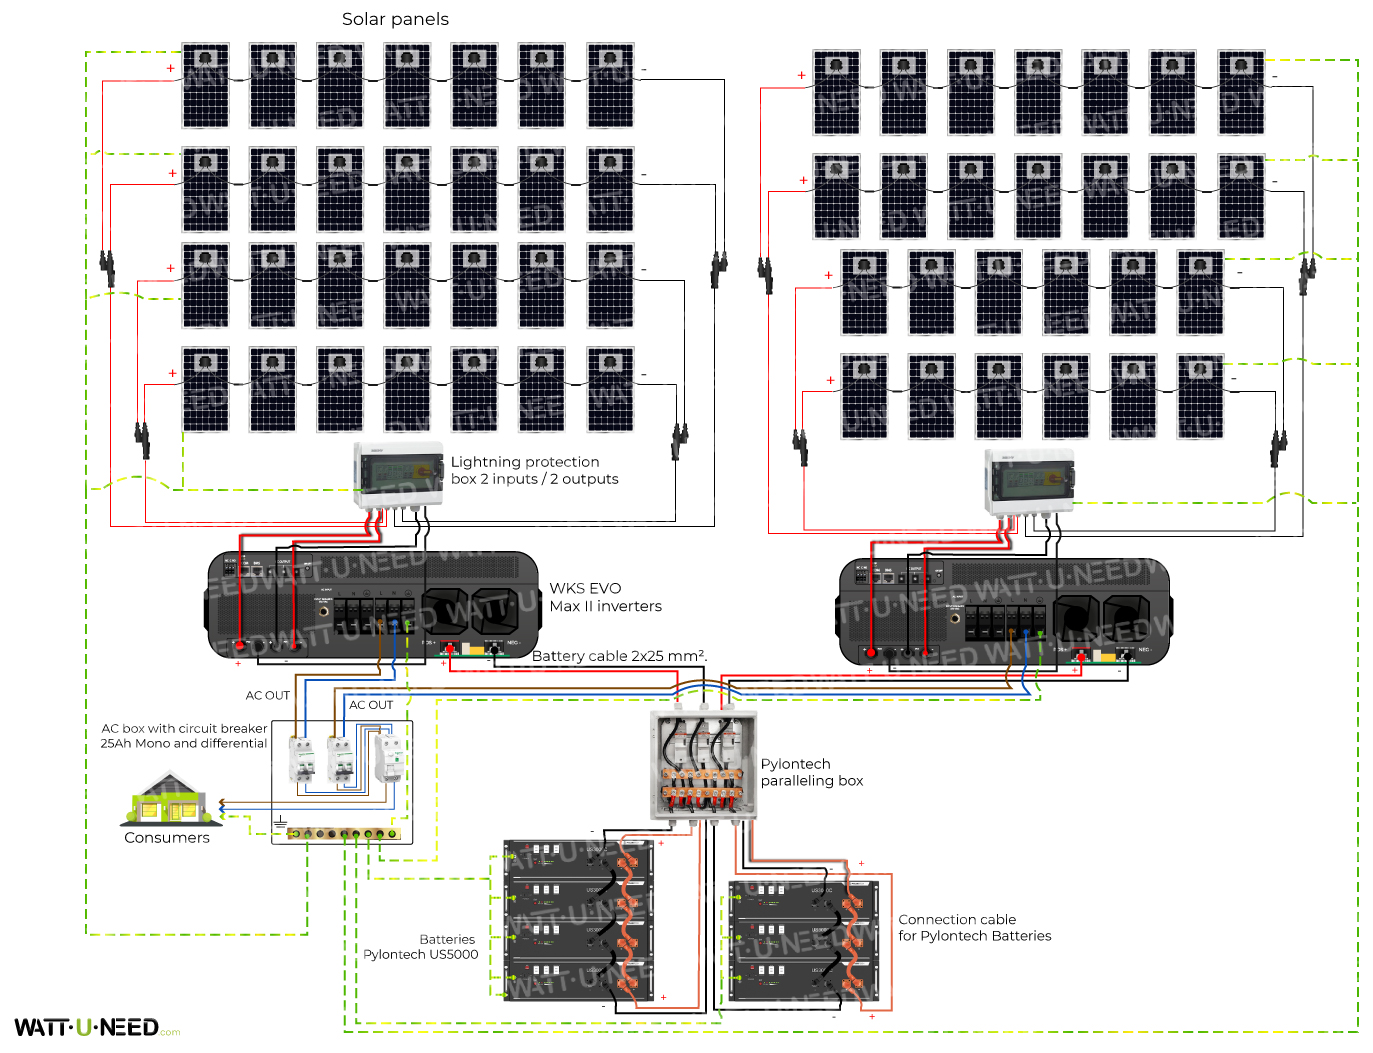 Connection diagram 54 panels 20kVA with lithium storage